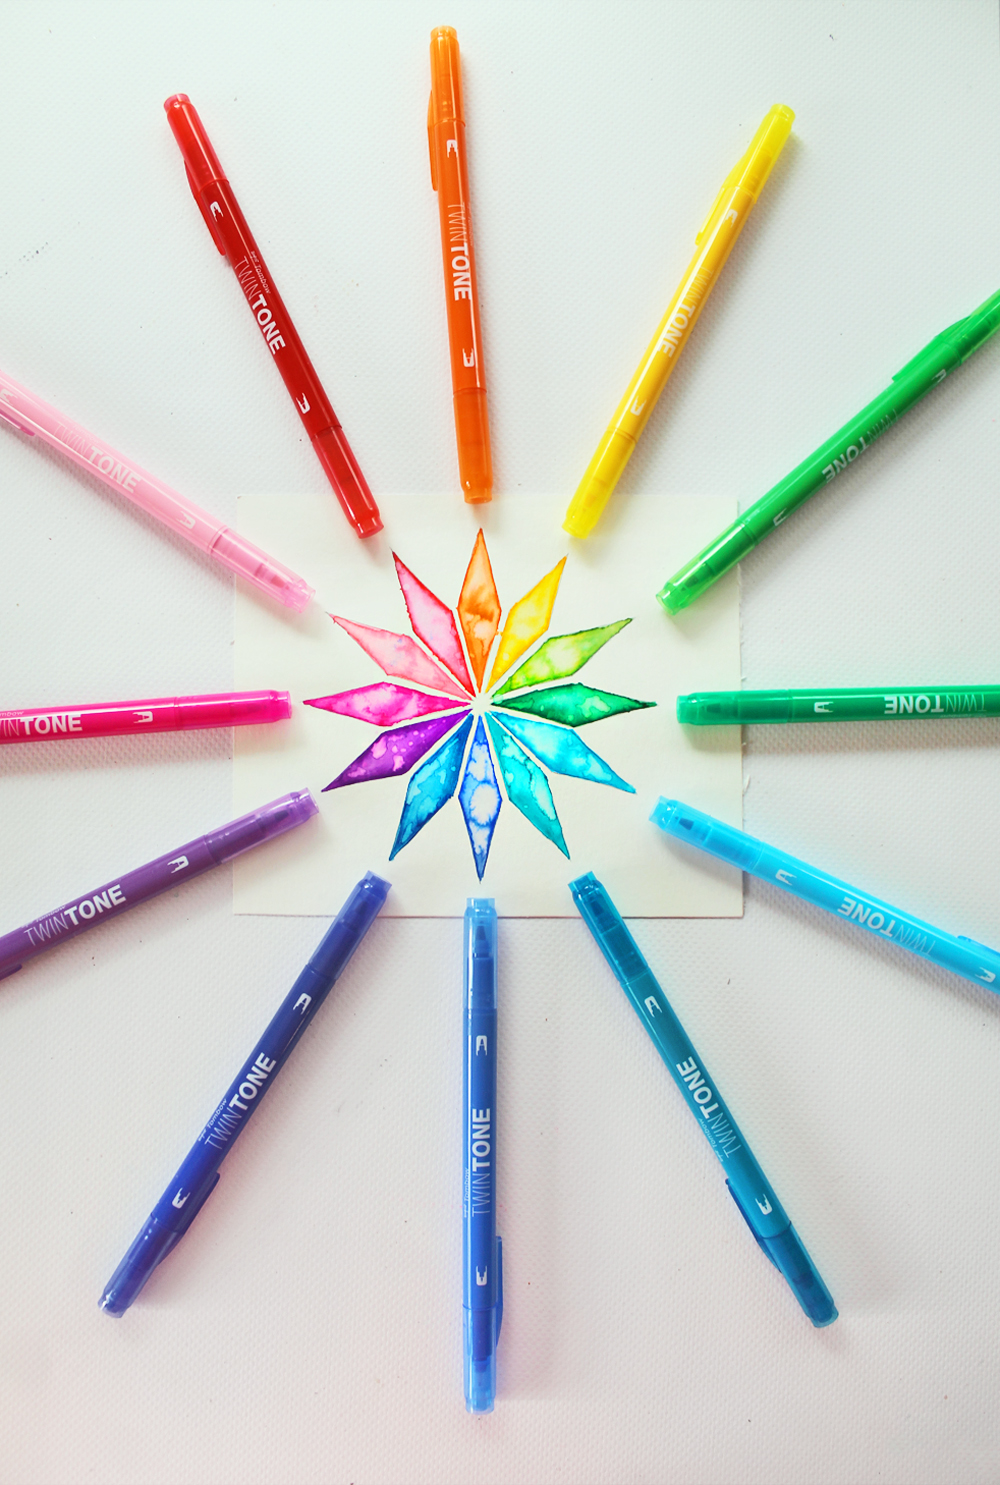 Learn how to "paint" Geometric Rainbow Art using the new Tombow TwinTone Rainbow set with this tutorial by @studiokatie on the @tombowusa blog. #tombowusa #rainbow #watercolor